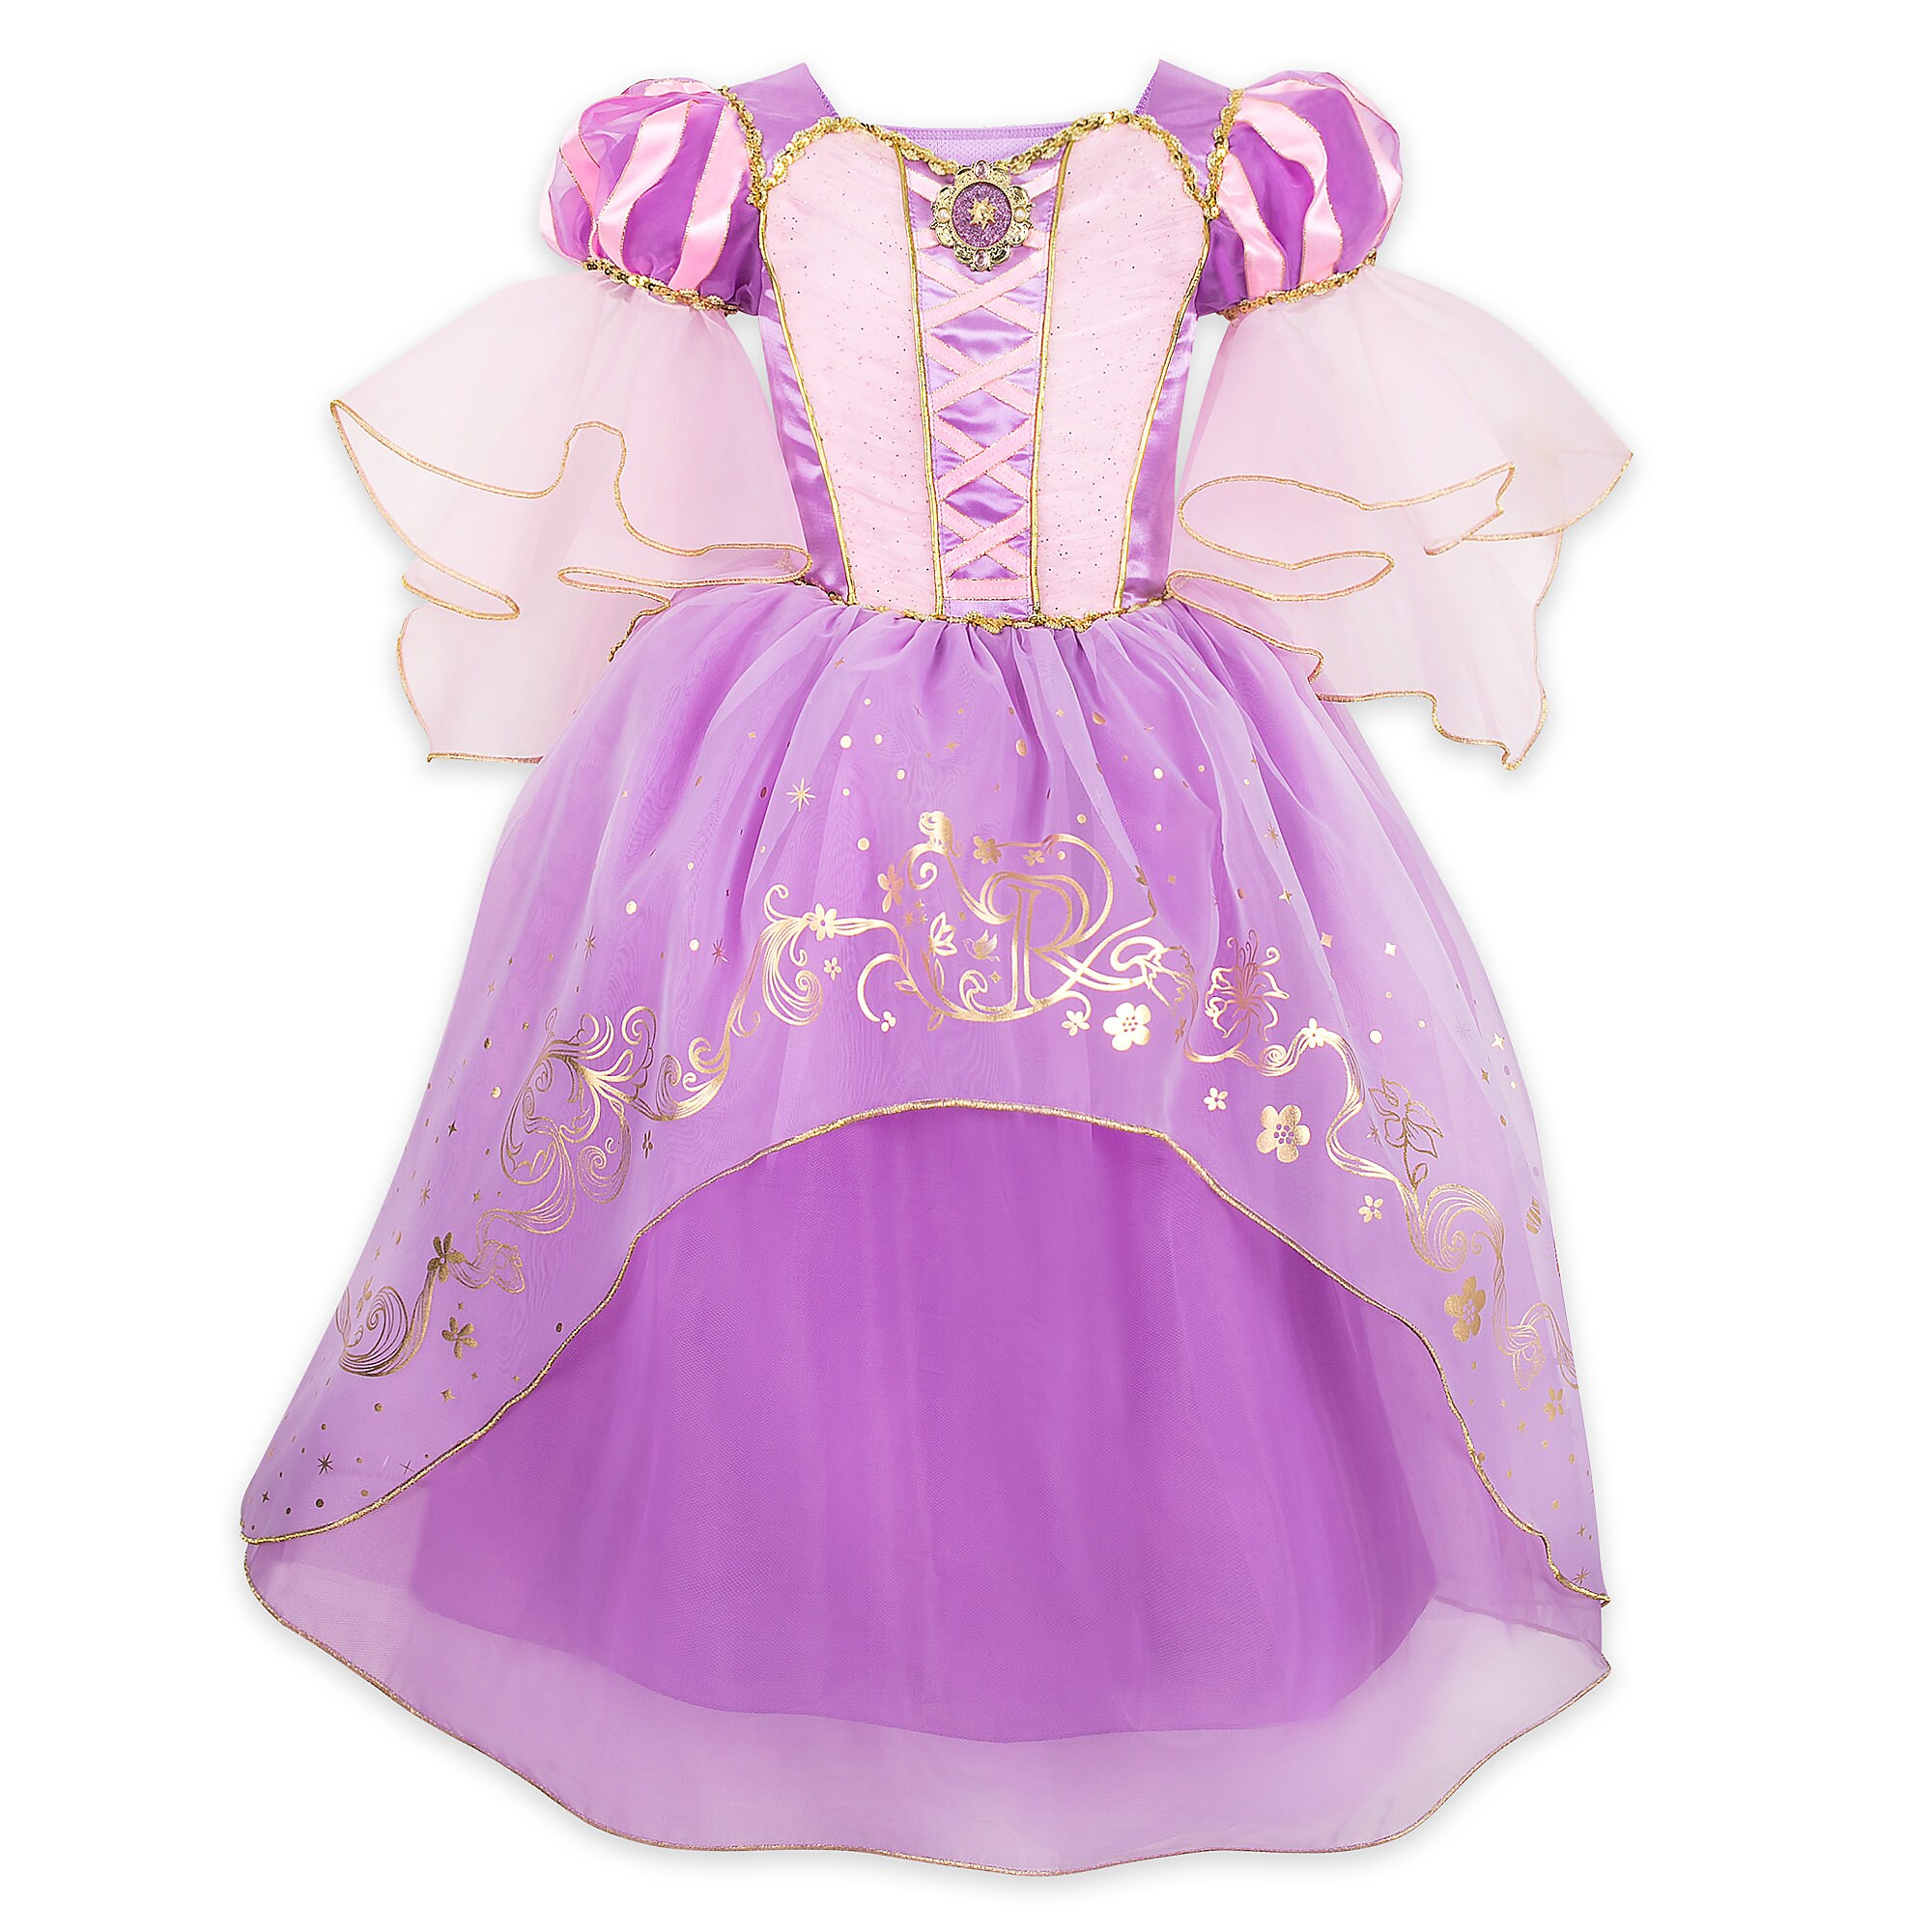 Rapunzel Costume for Kids - Tangled available online – Dis Merchandise News